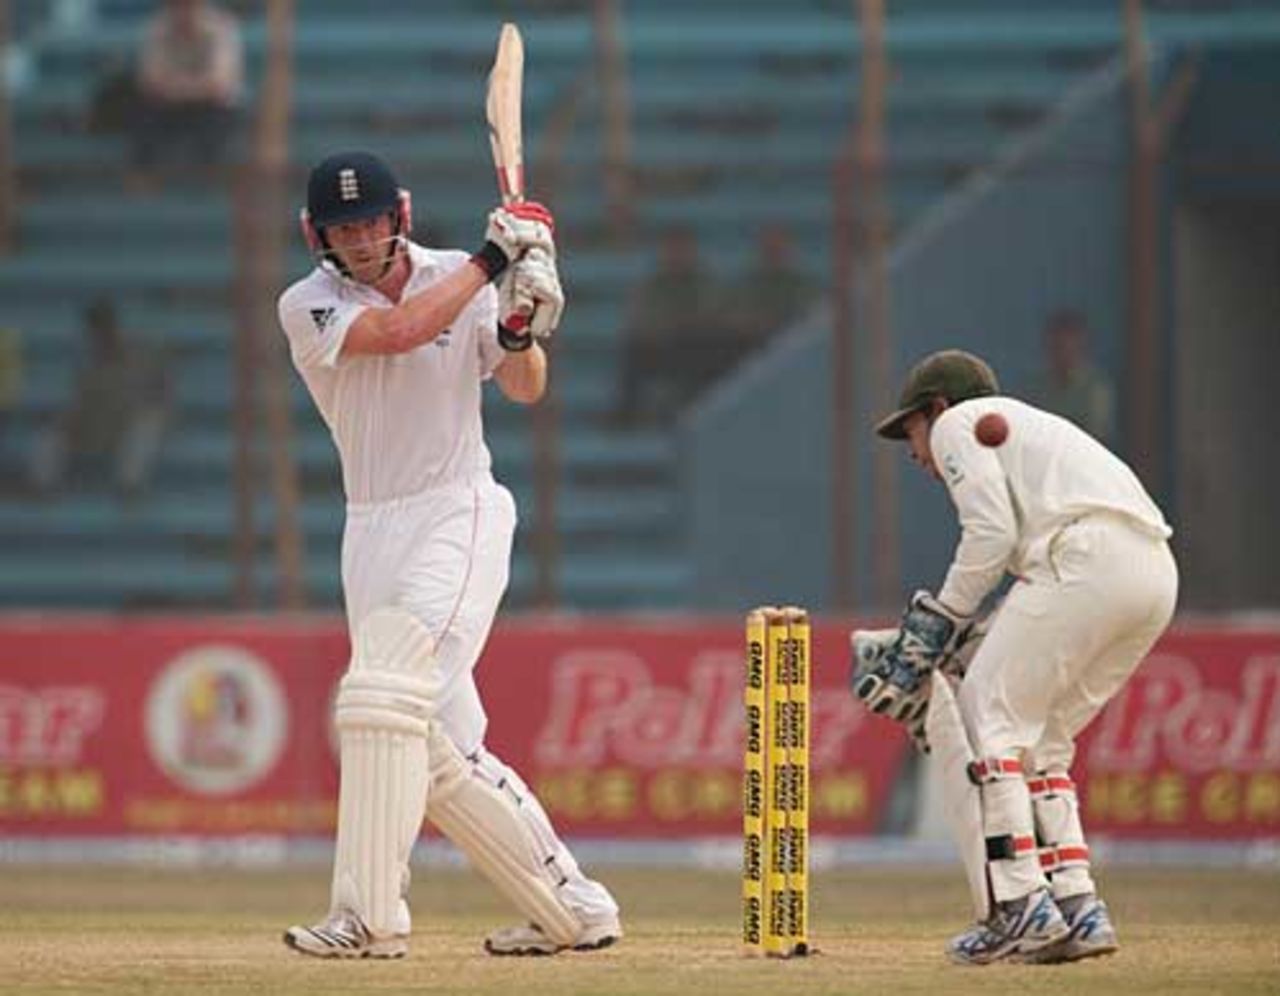 Paul Collingwood continued England's march towards a massive total, Bangladesh v England, 1st Test, Chittagong, March 13, 2010